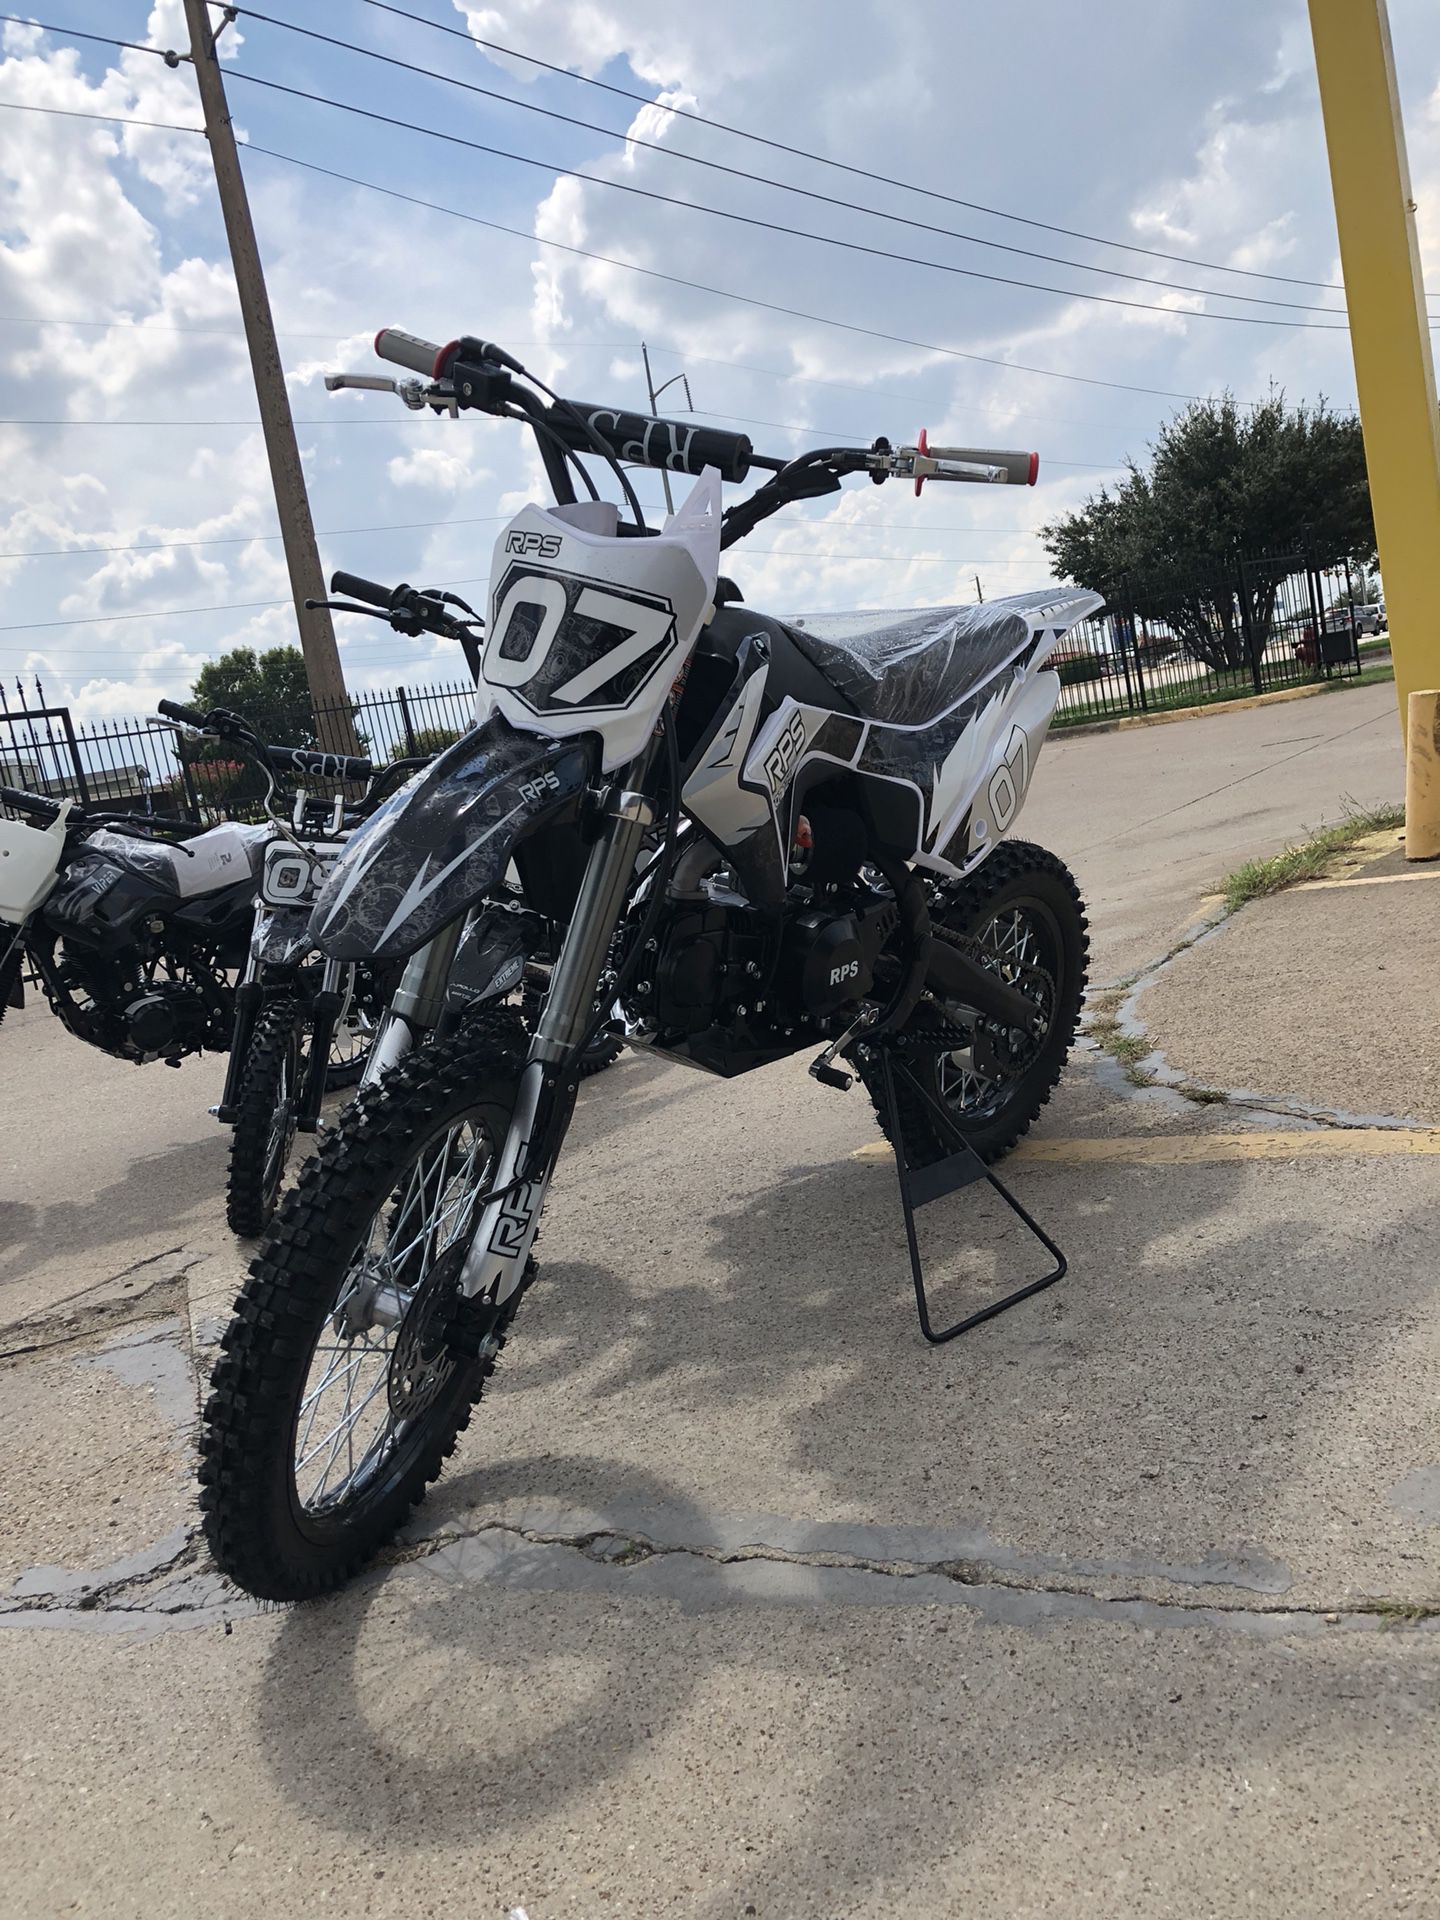 RPS 125cc dirt bike with full size tire